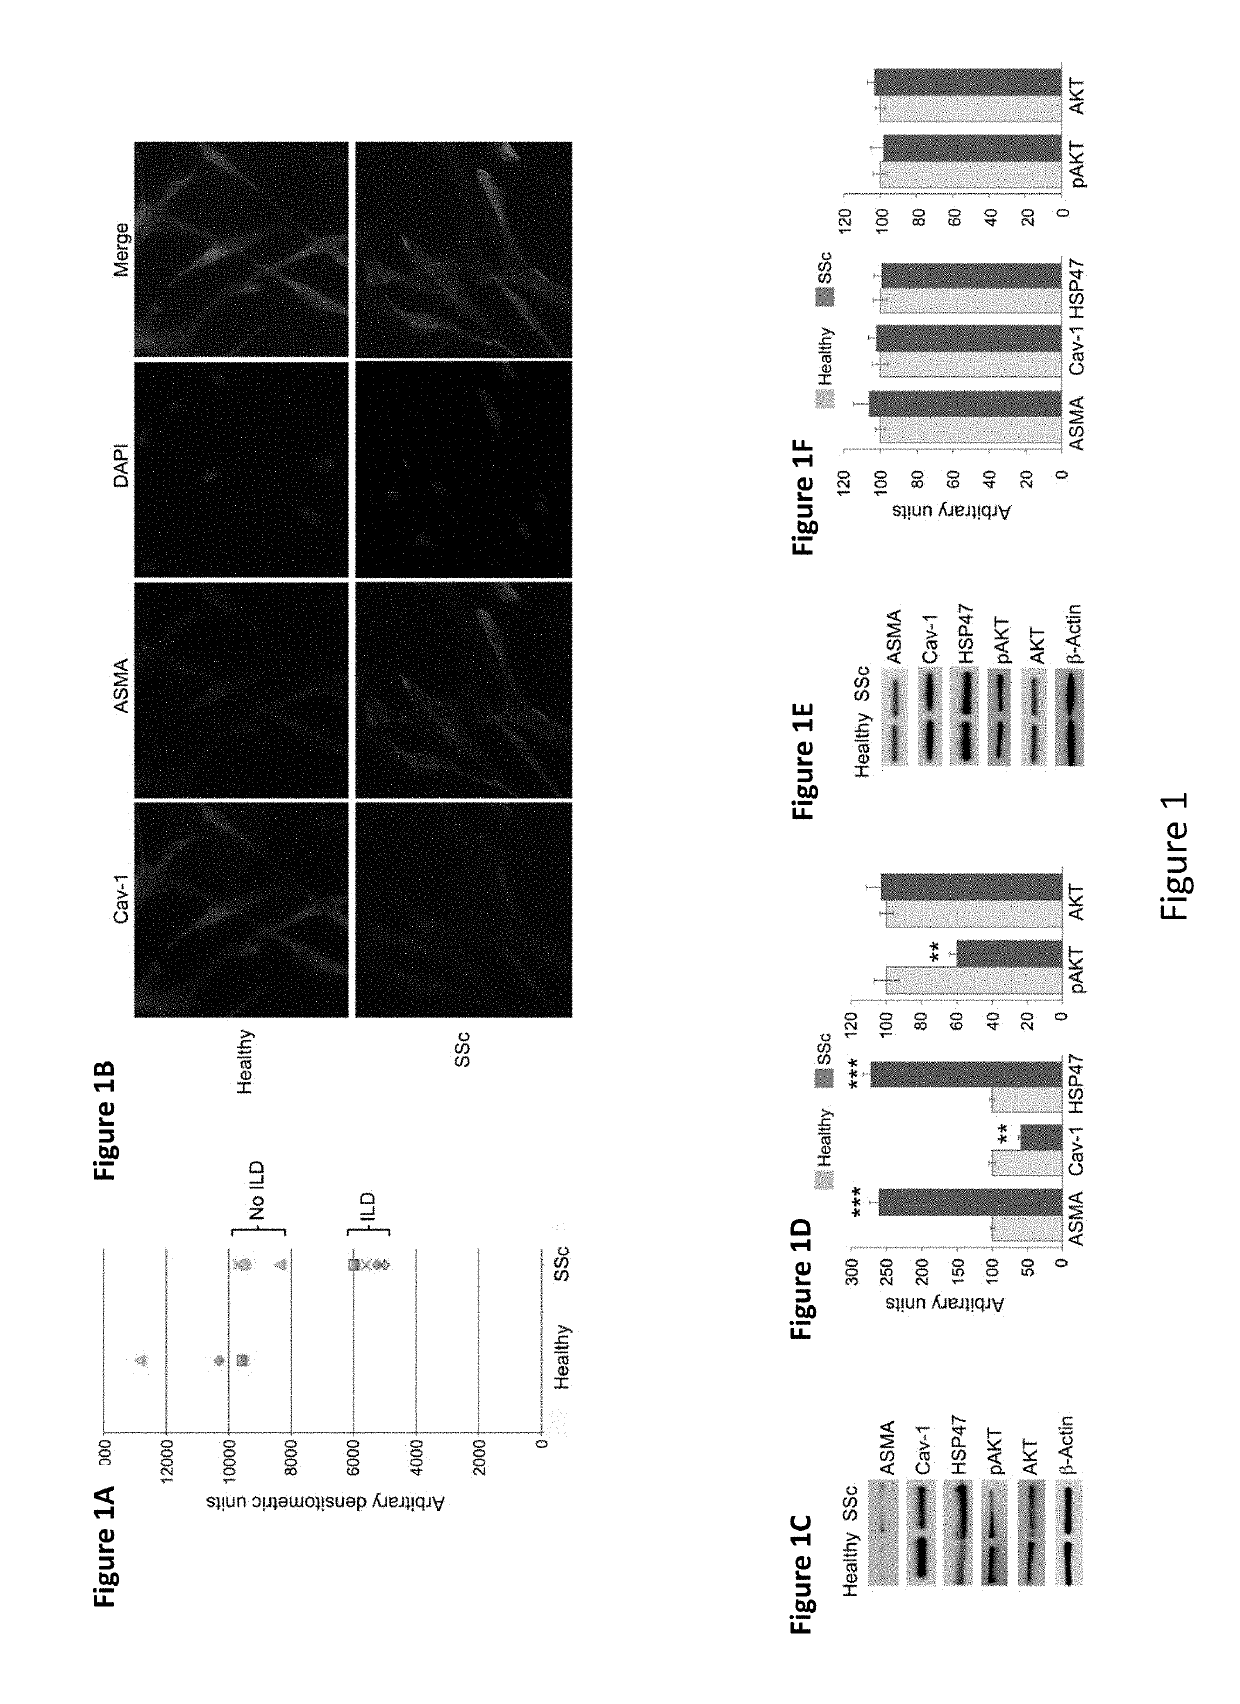 Enhancement of the Beneficial Effects of Mesenchymal Stem Cell Treatment by the Caveolin-1 Scaffolding Domain Peptide and Subdomains